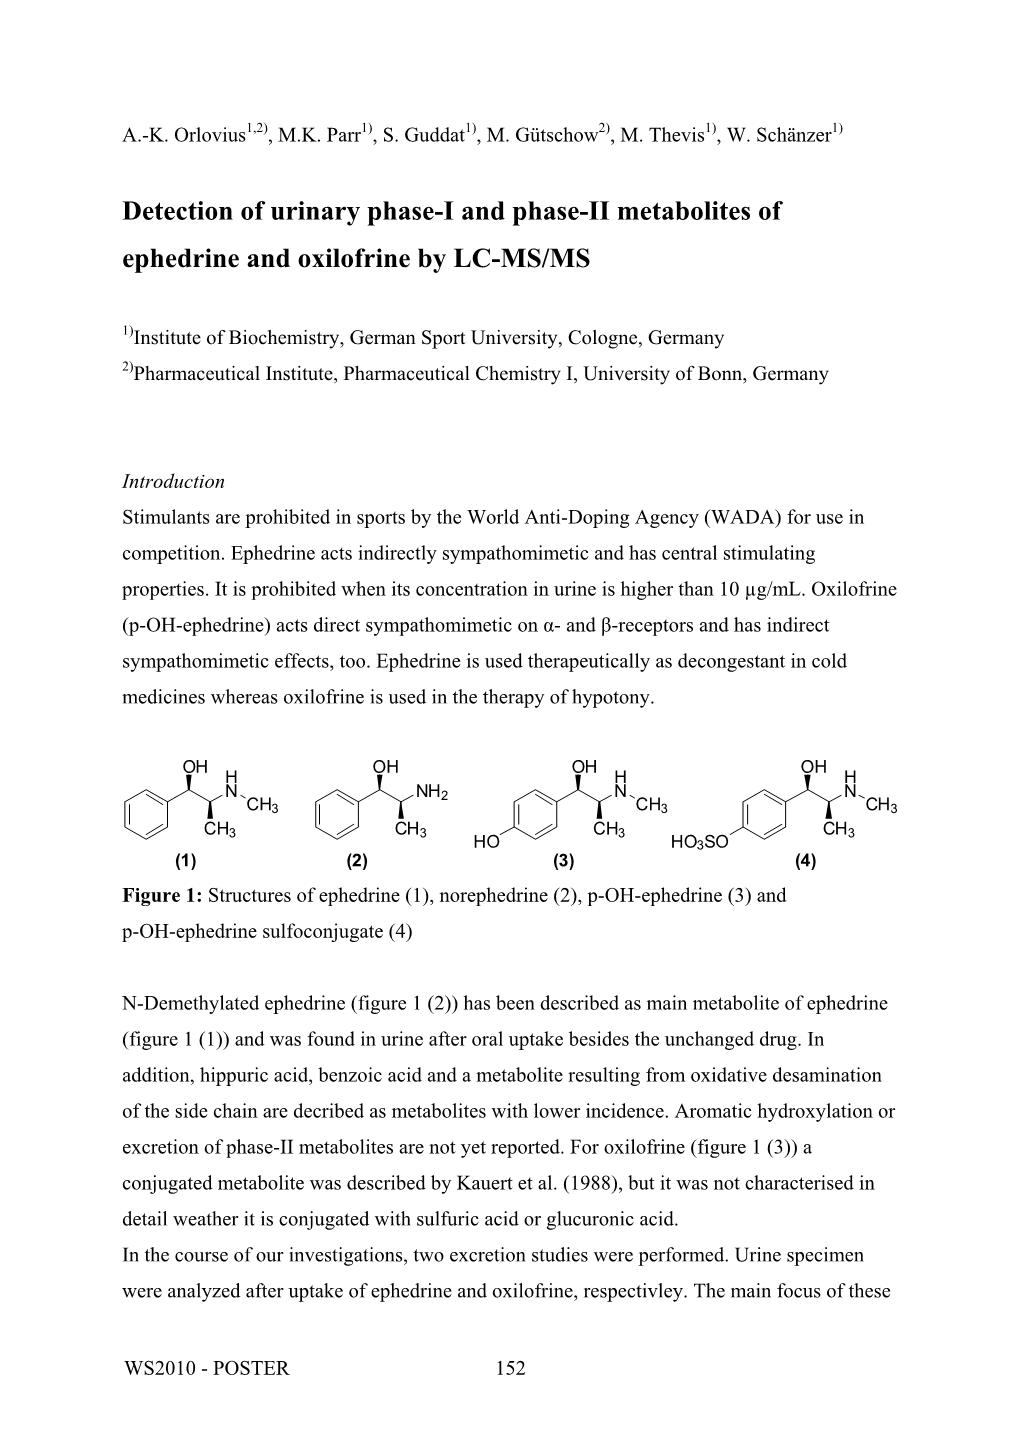 Detection of Urinary Phase-I and Phase-II Metabolites of Ephedrine and Oxilofrine by LC-MS/MS